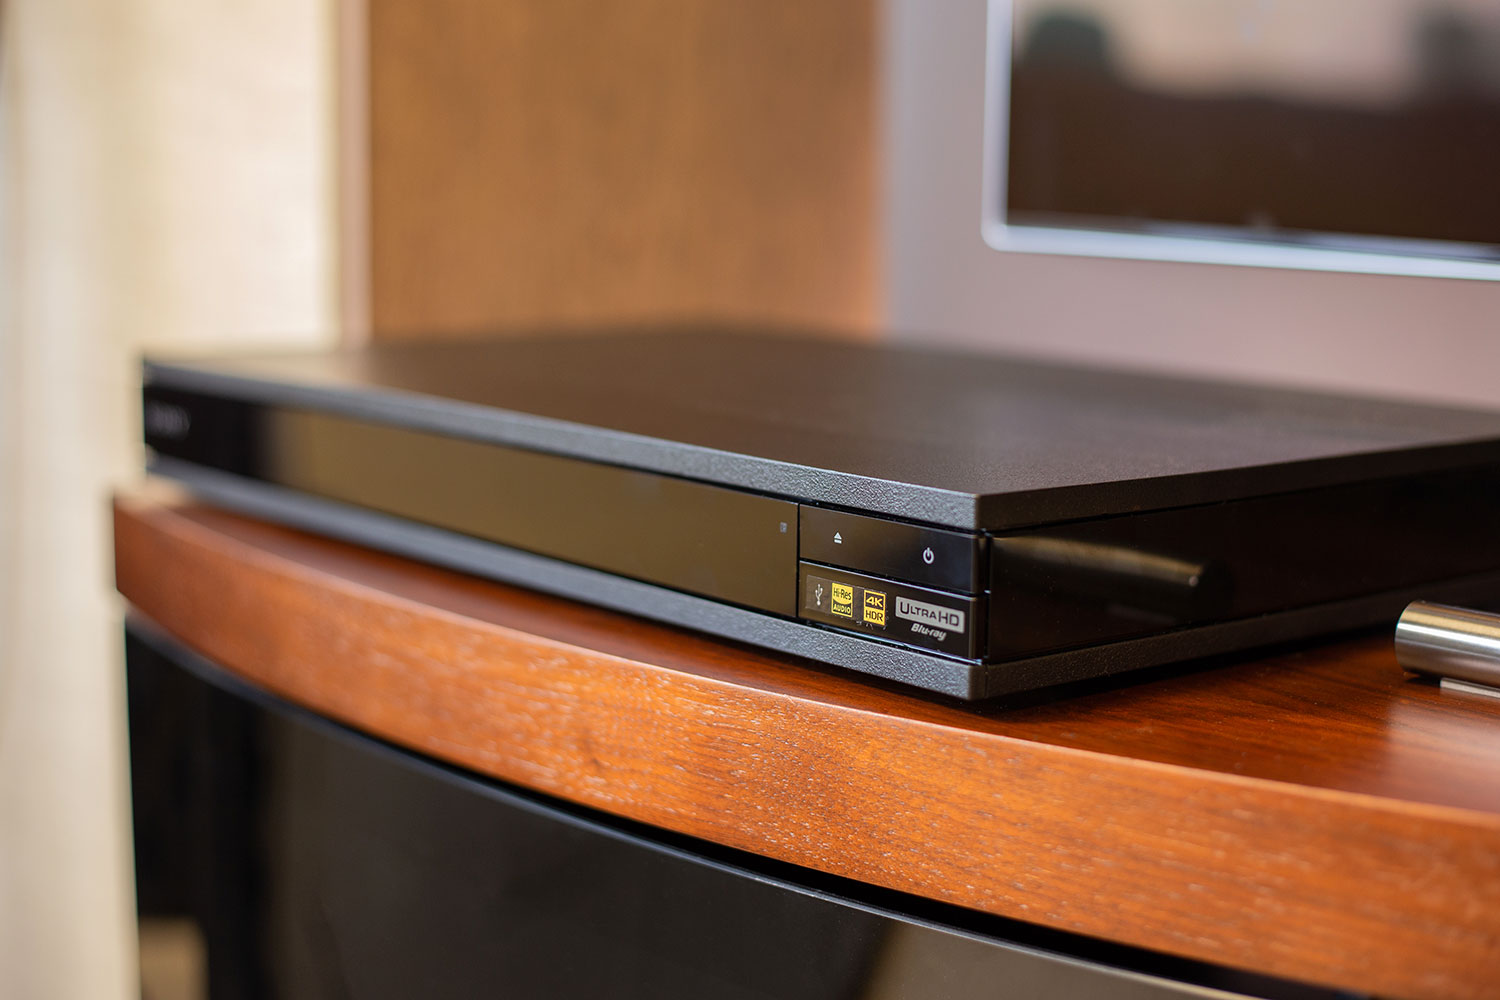 Sony UBP-X800 review: A 4K Blu-ray player alternative with a